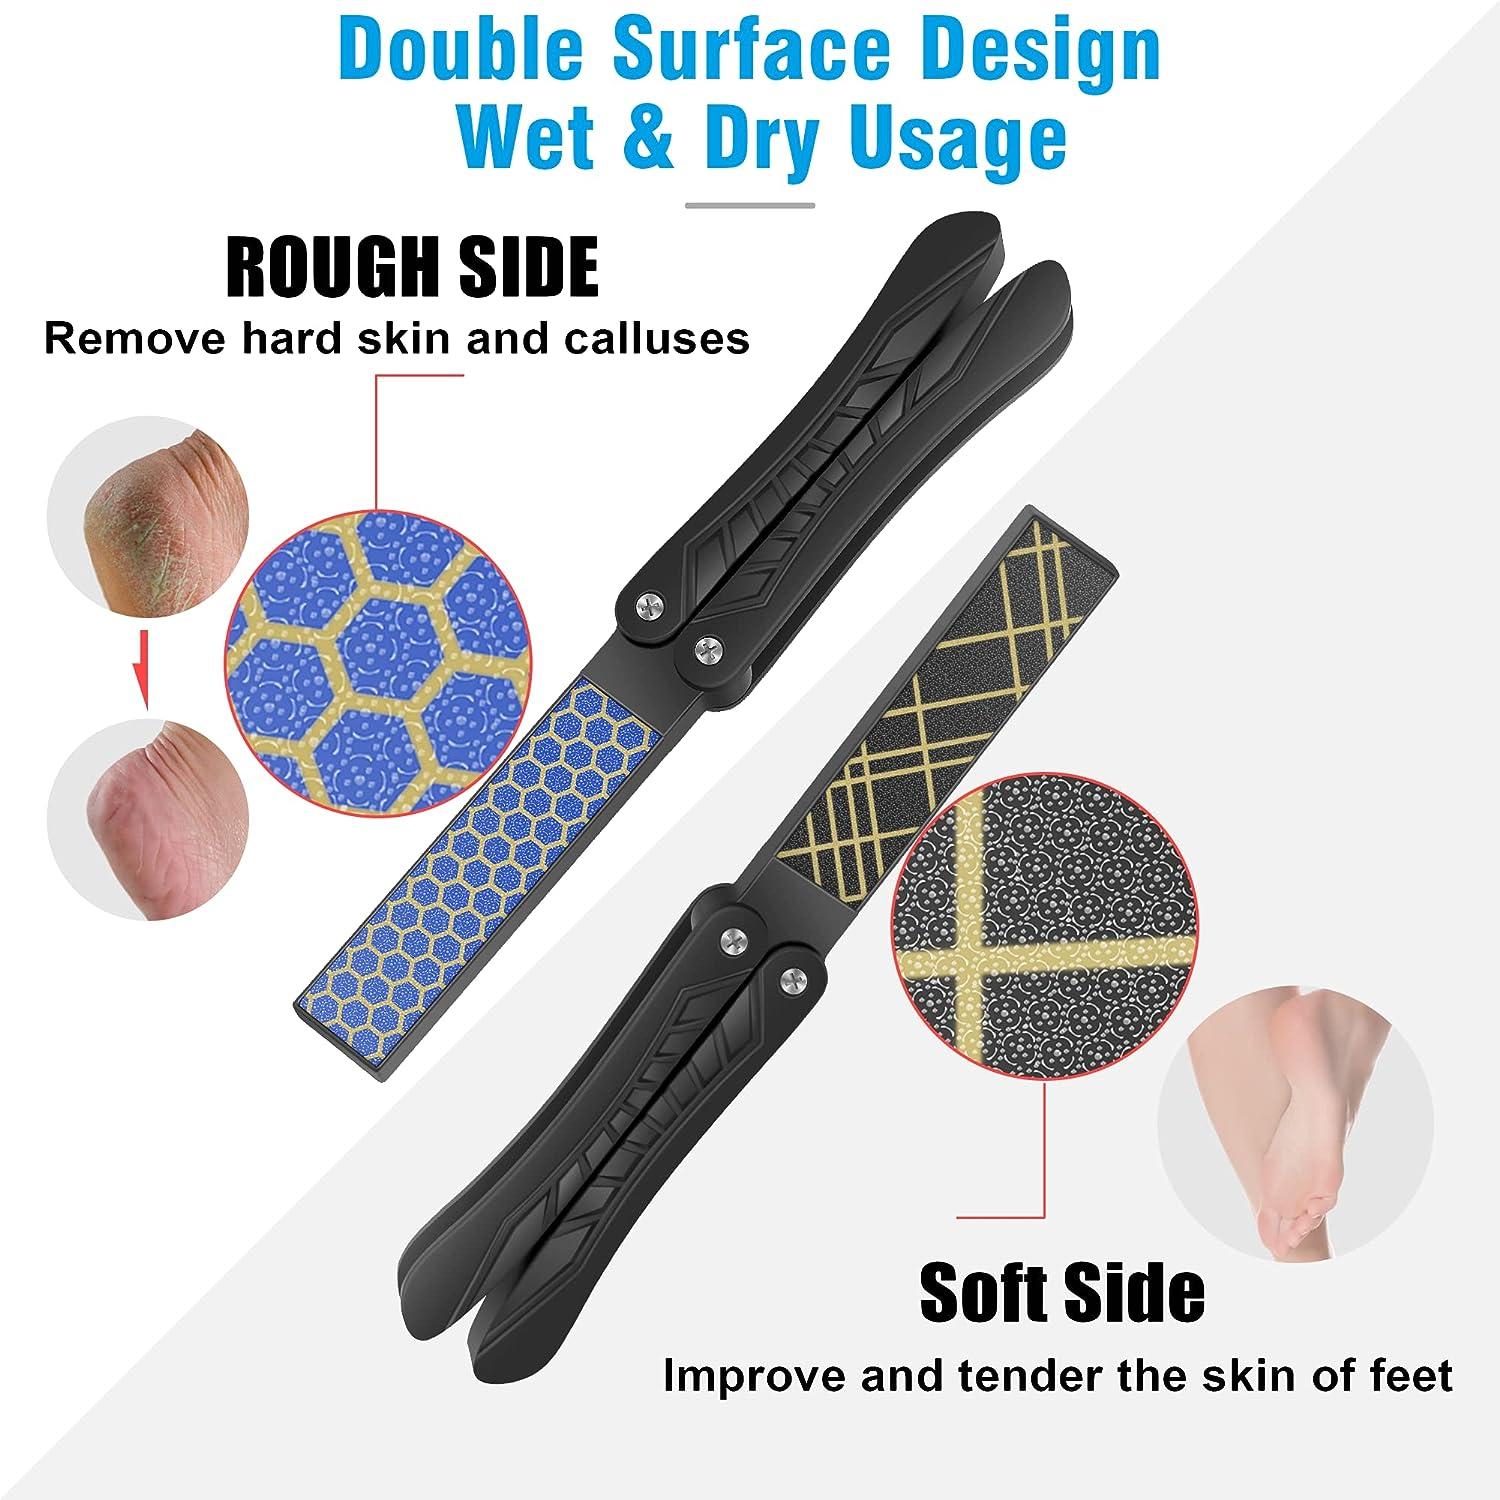 Innovative Nano Crystal Feet Scrubber, Portable Pedicure Foot Scraper For Dead  Skin Removal,suitable For Wet And Dry Safe Healthy Portable